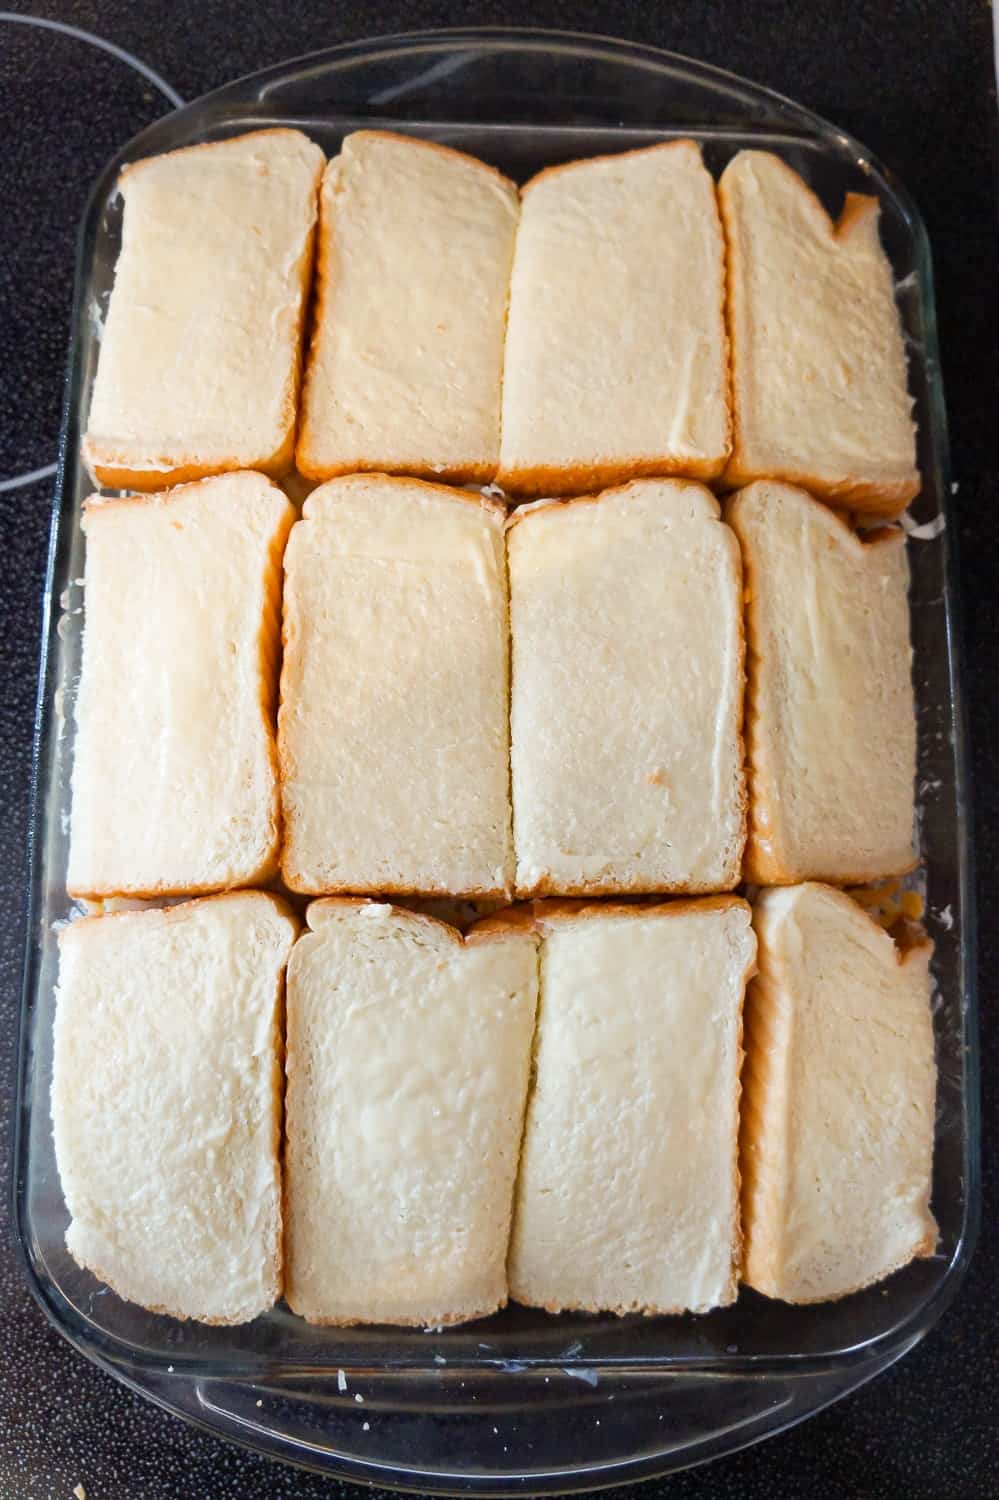 slices of bread on top of grilled cheese casserole before baking